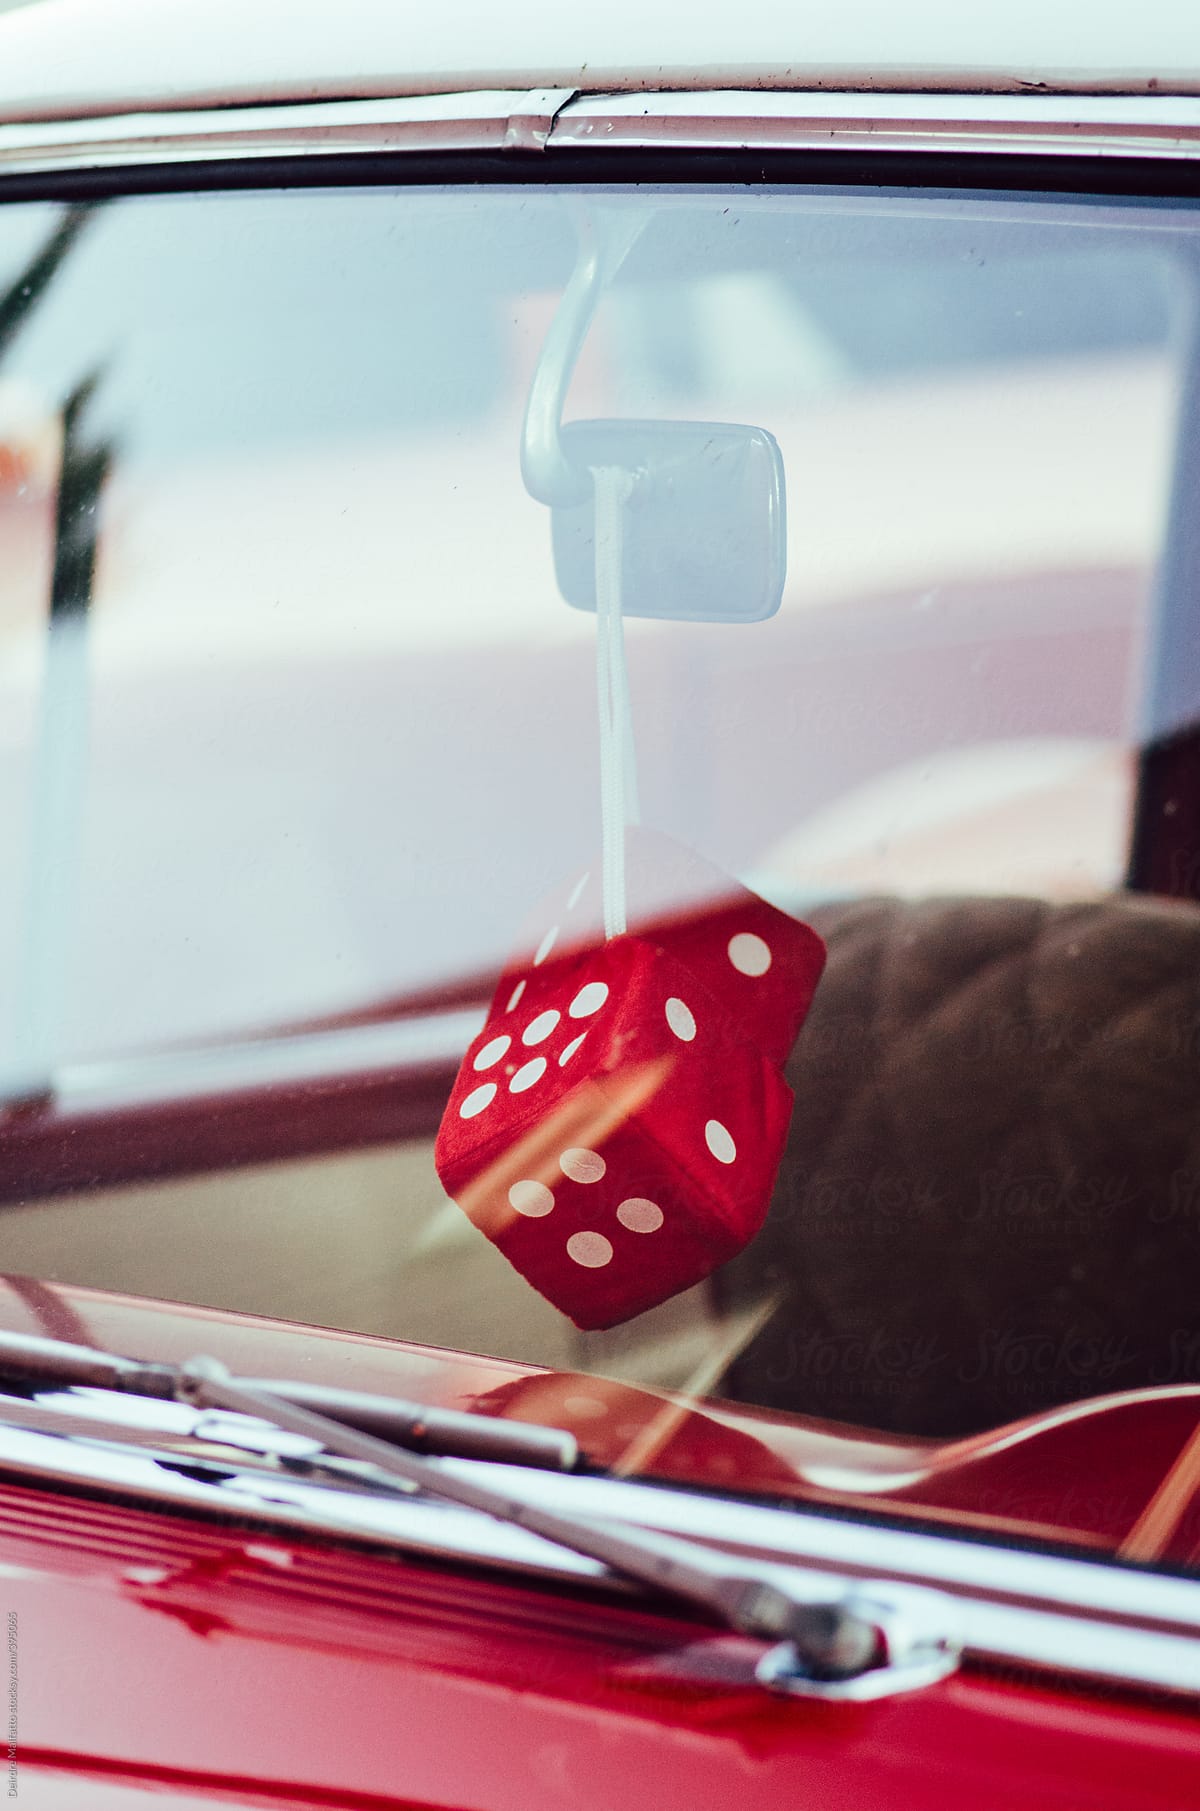 fuzzy red dice in a classic red car